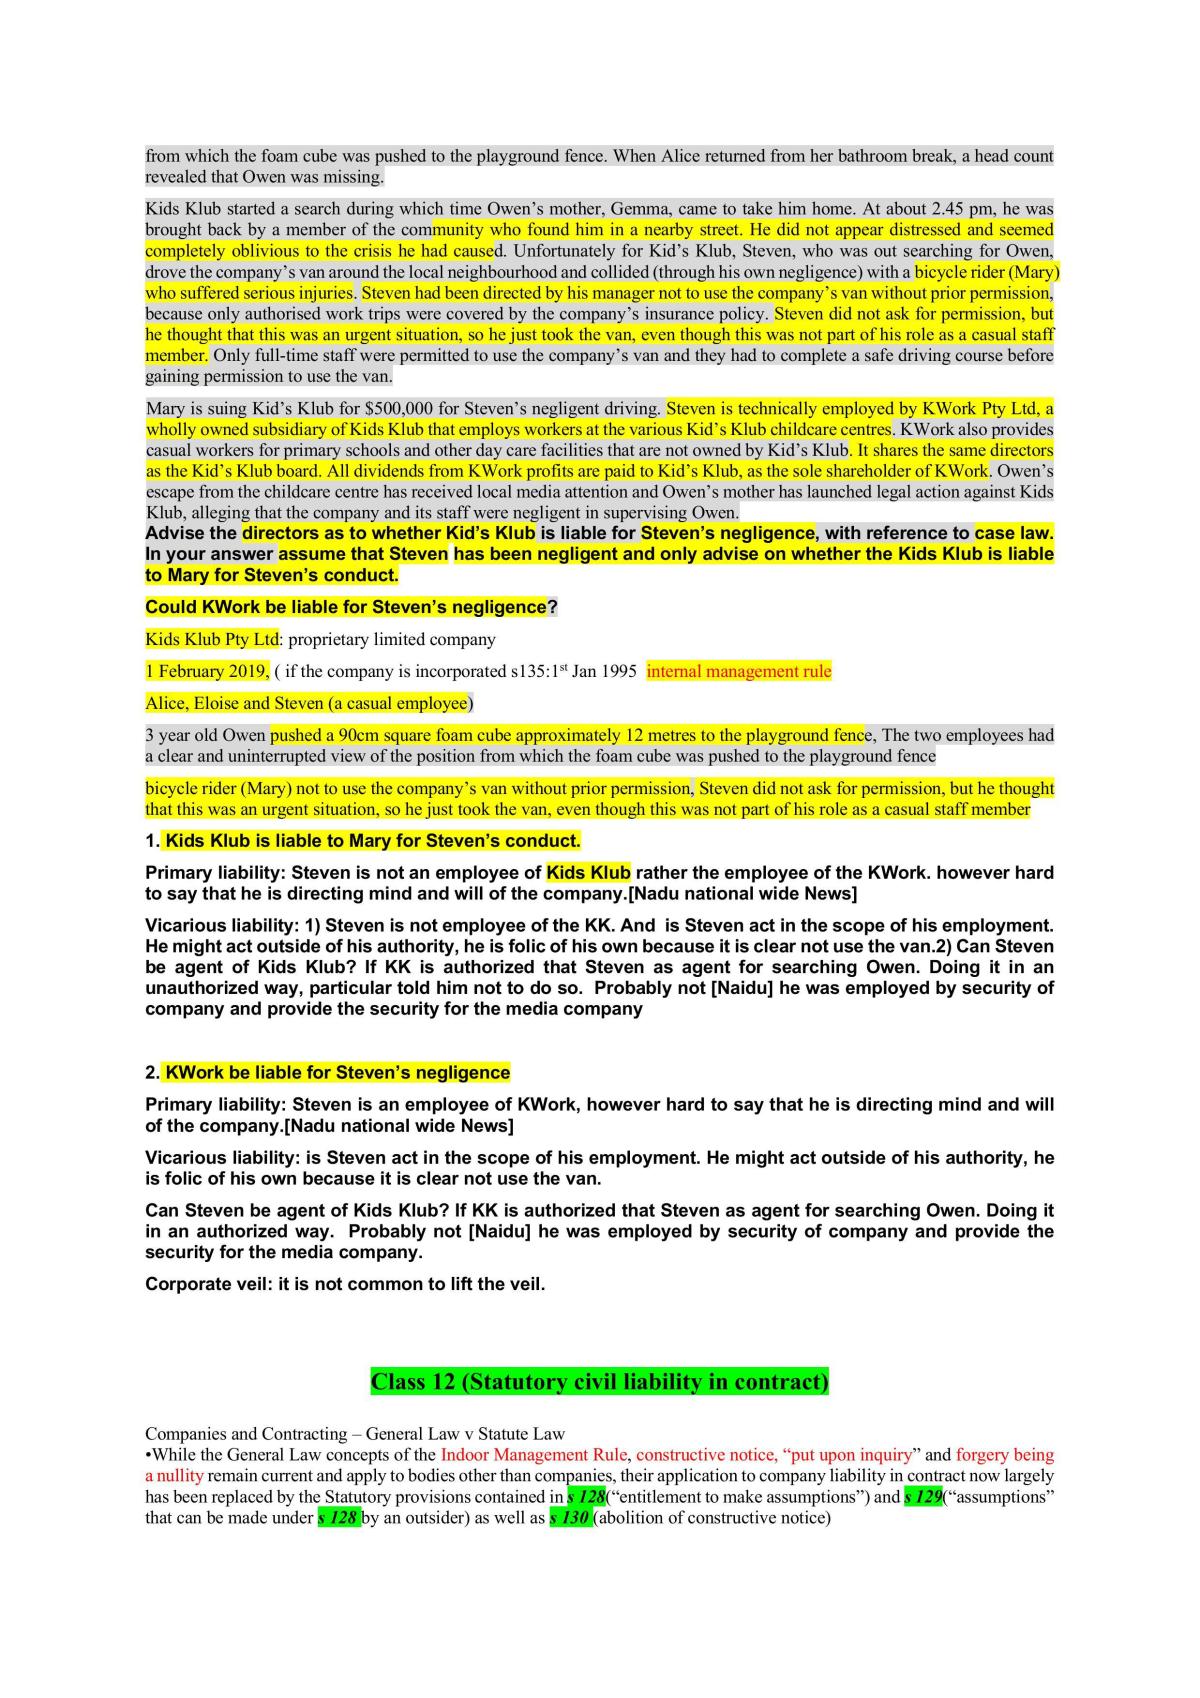 LAWS2014 Complete Study Notes LAWS2014 - Corporations